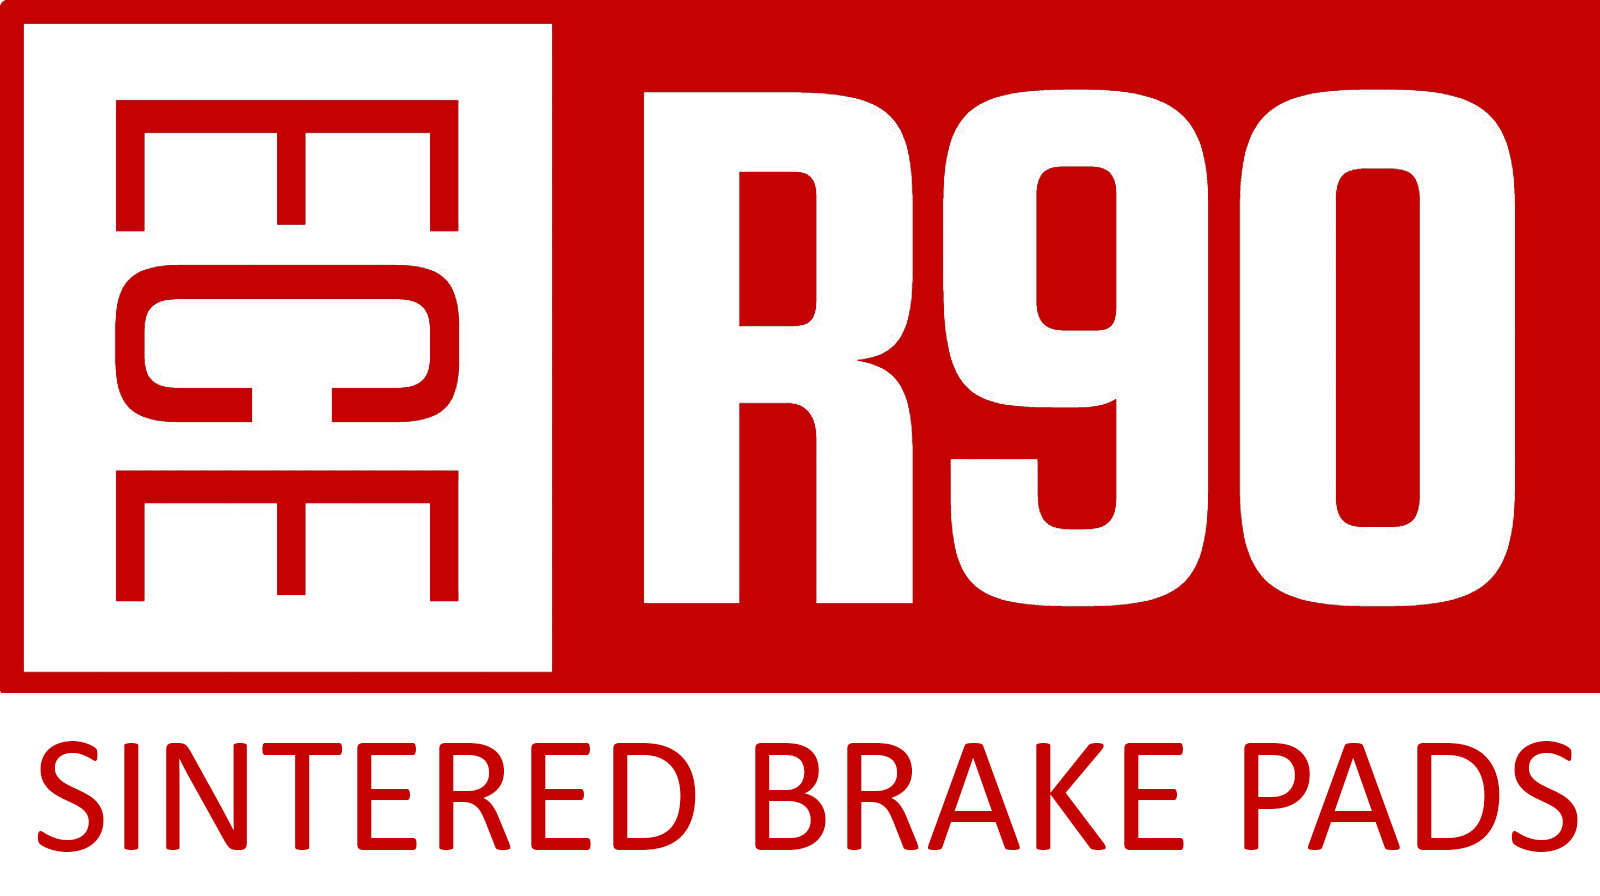 Certifications ECE R 90 for sintered brake pads